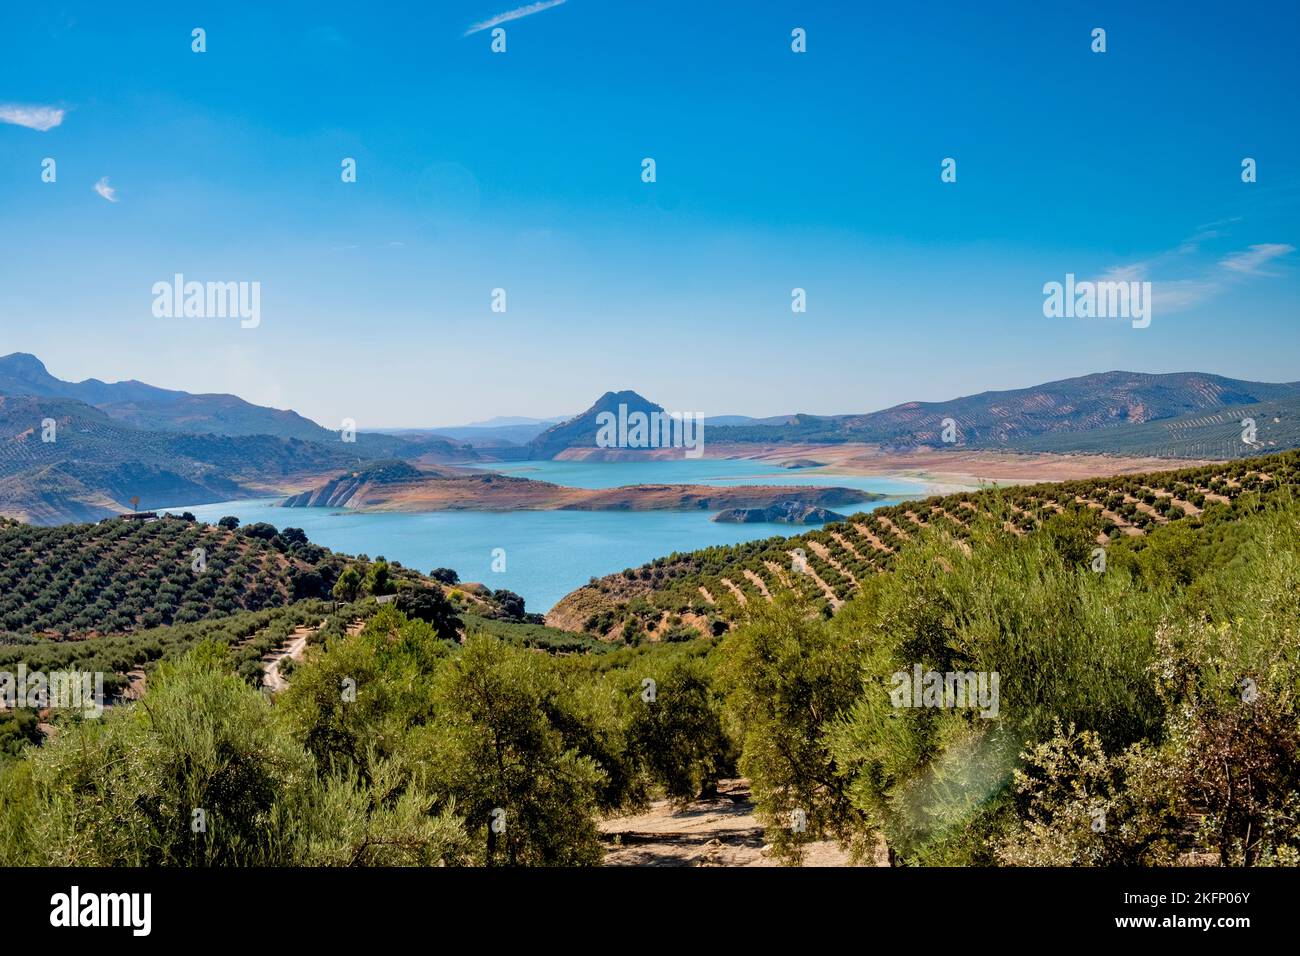 Drought conditions showing 15% water level in Iznajar Embalse, the largest reservoir in Andalucia, Spain Stock Photo